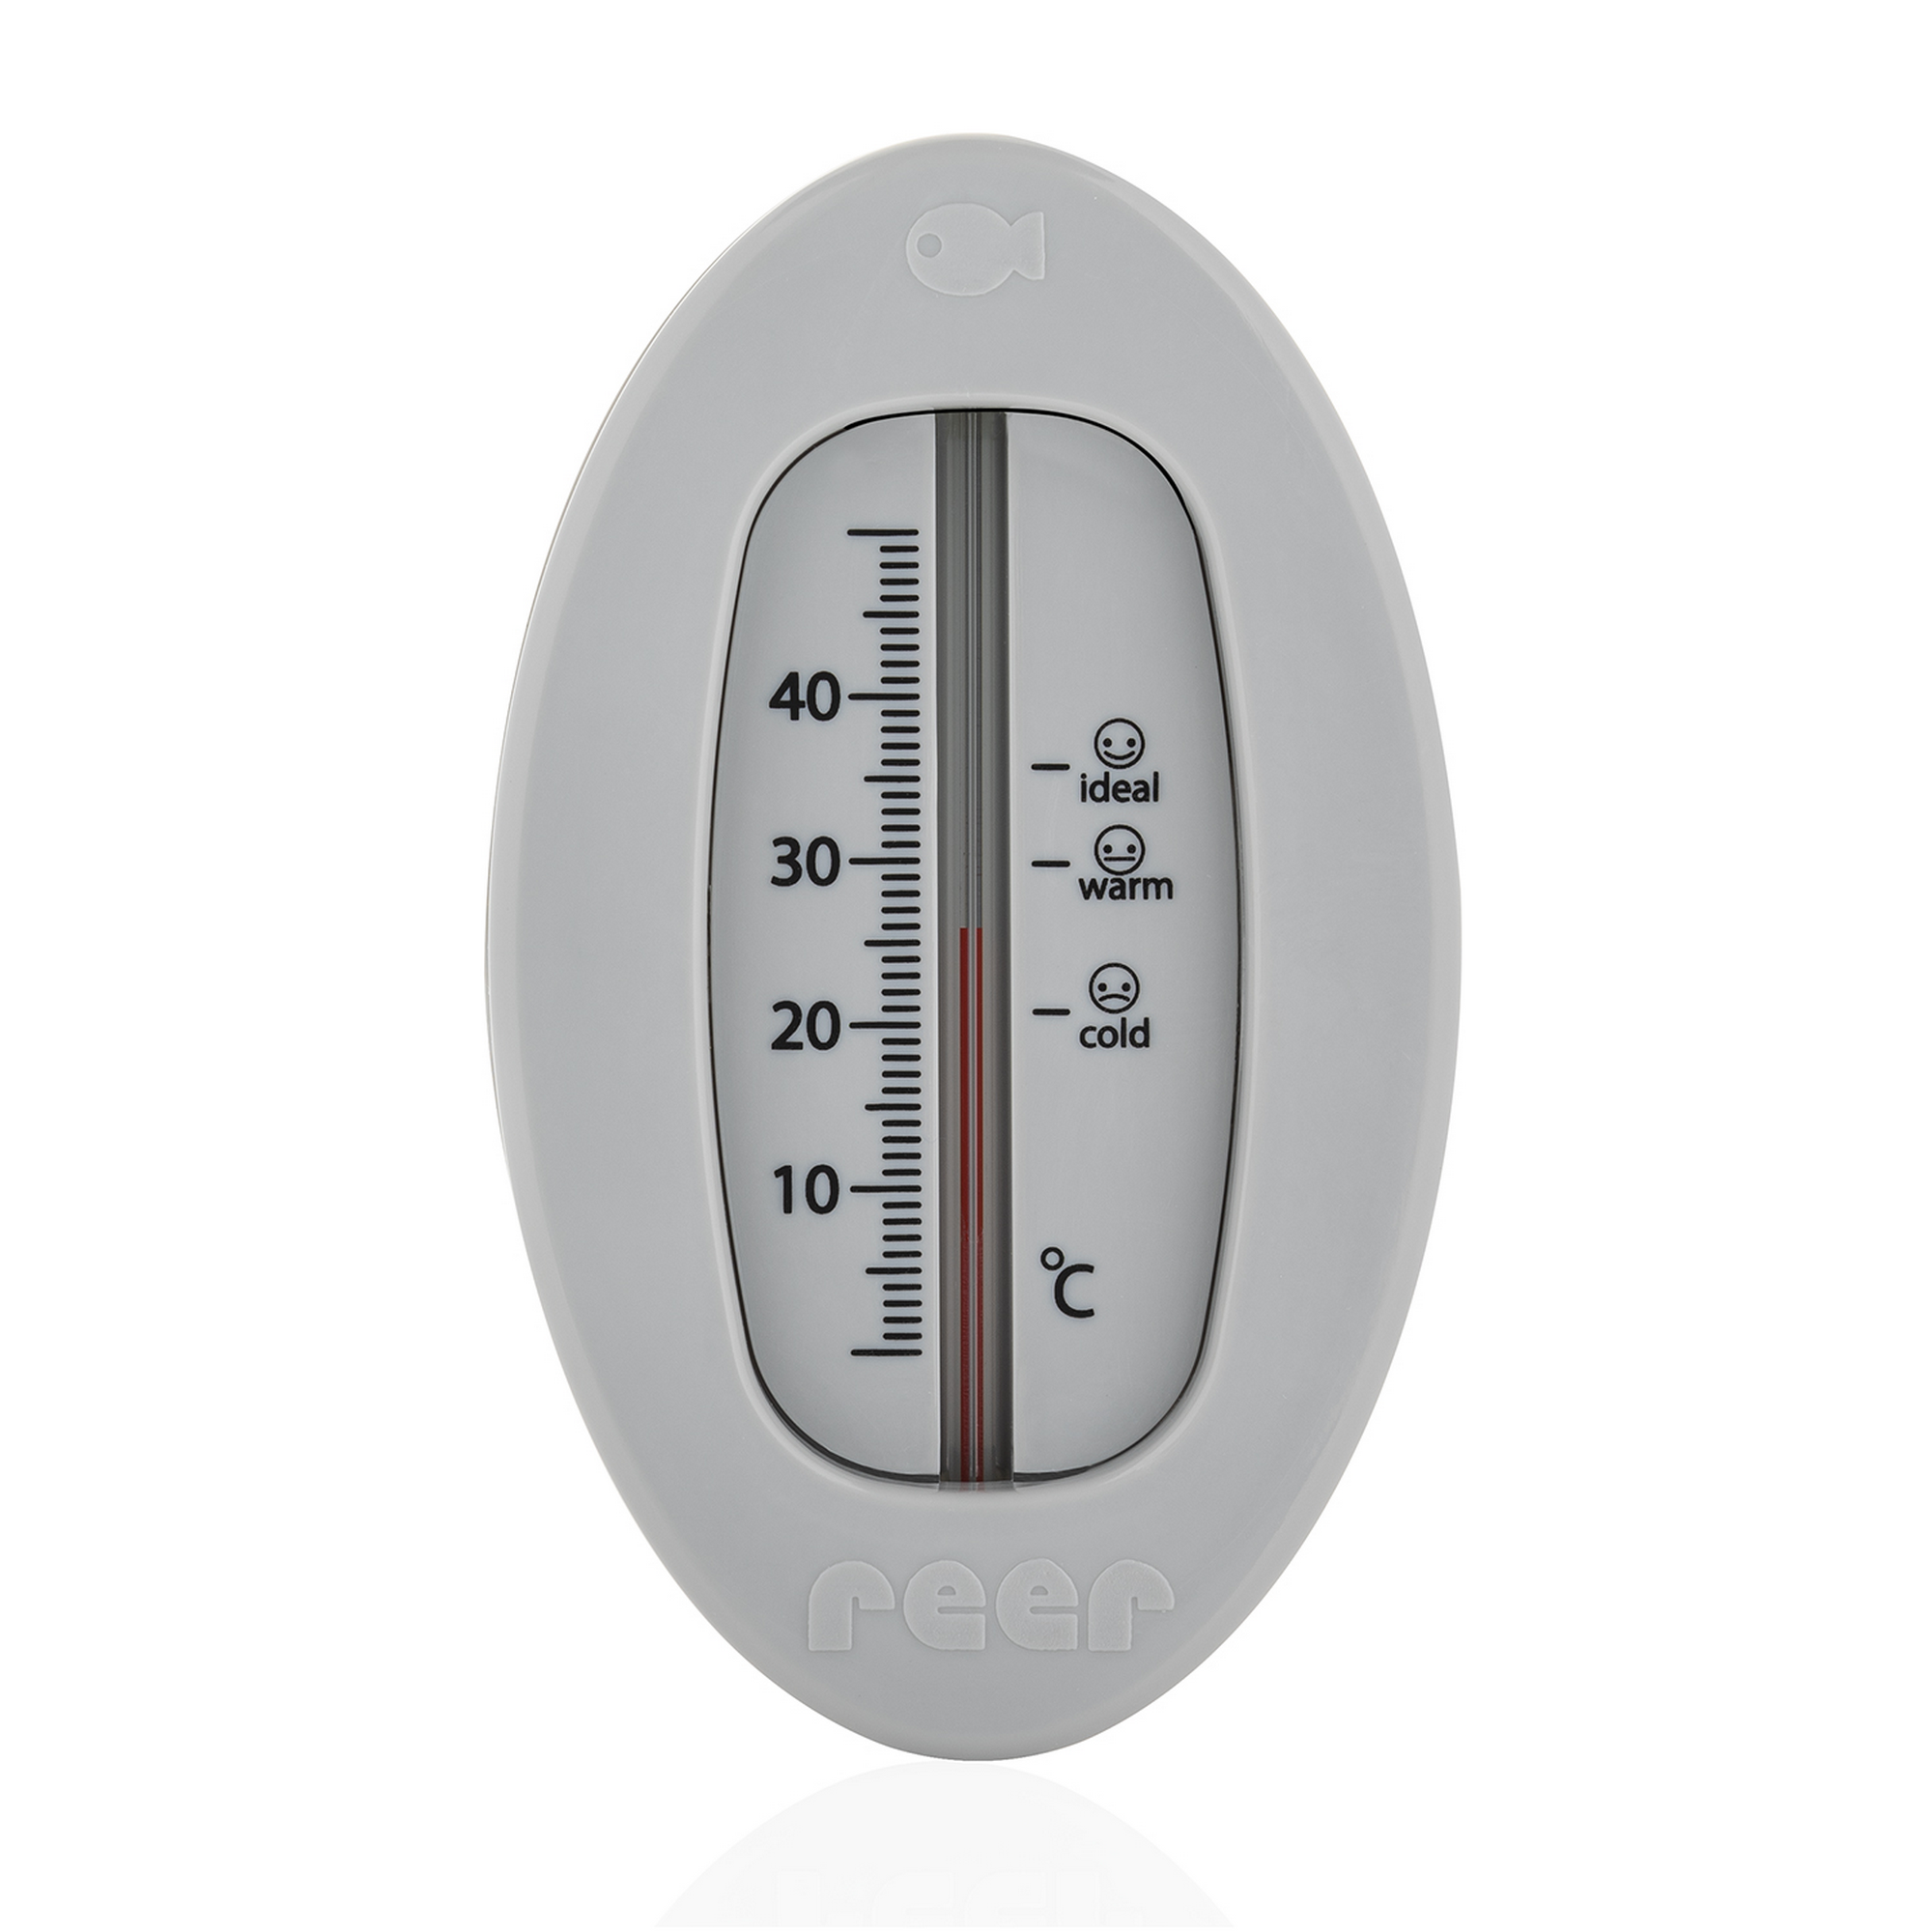 Badethermometer grau oval + product picture